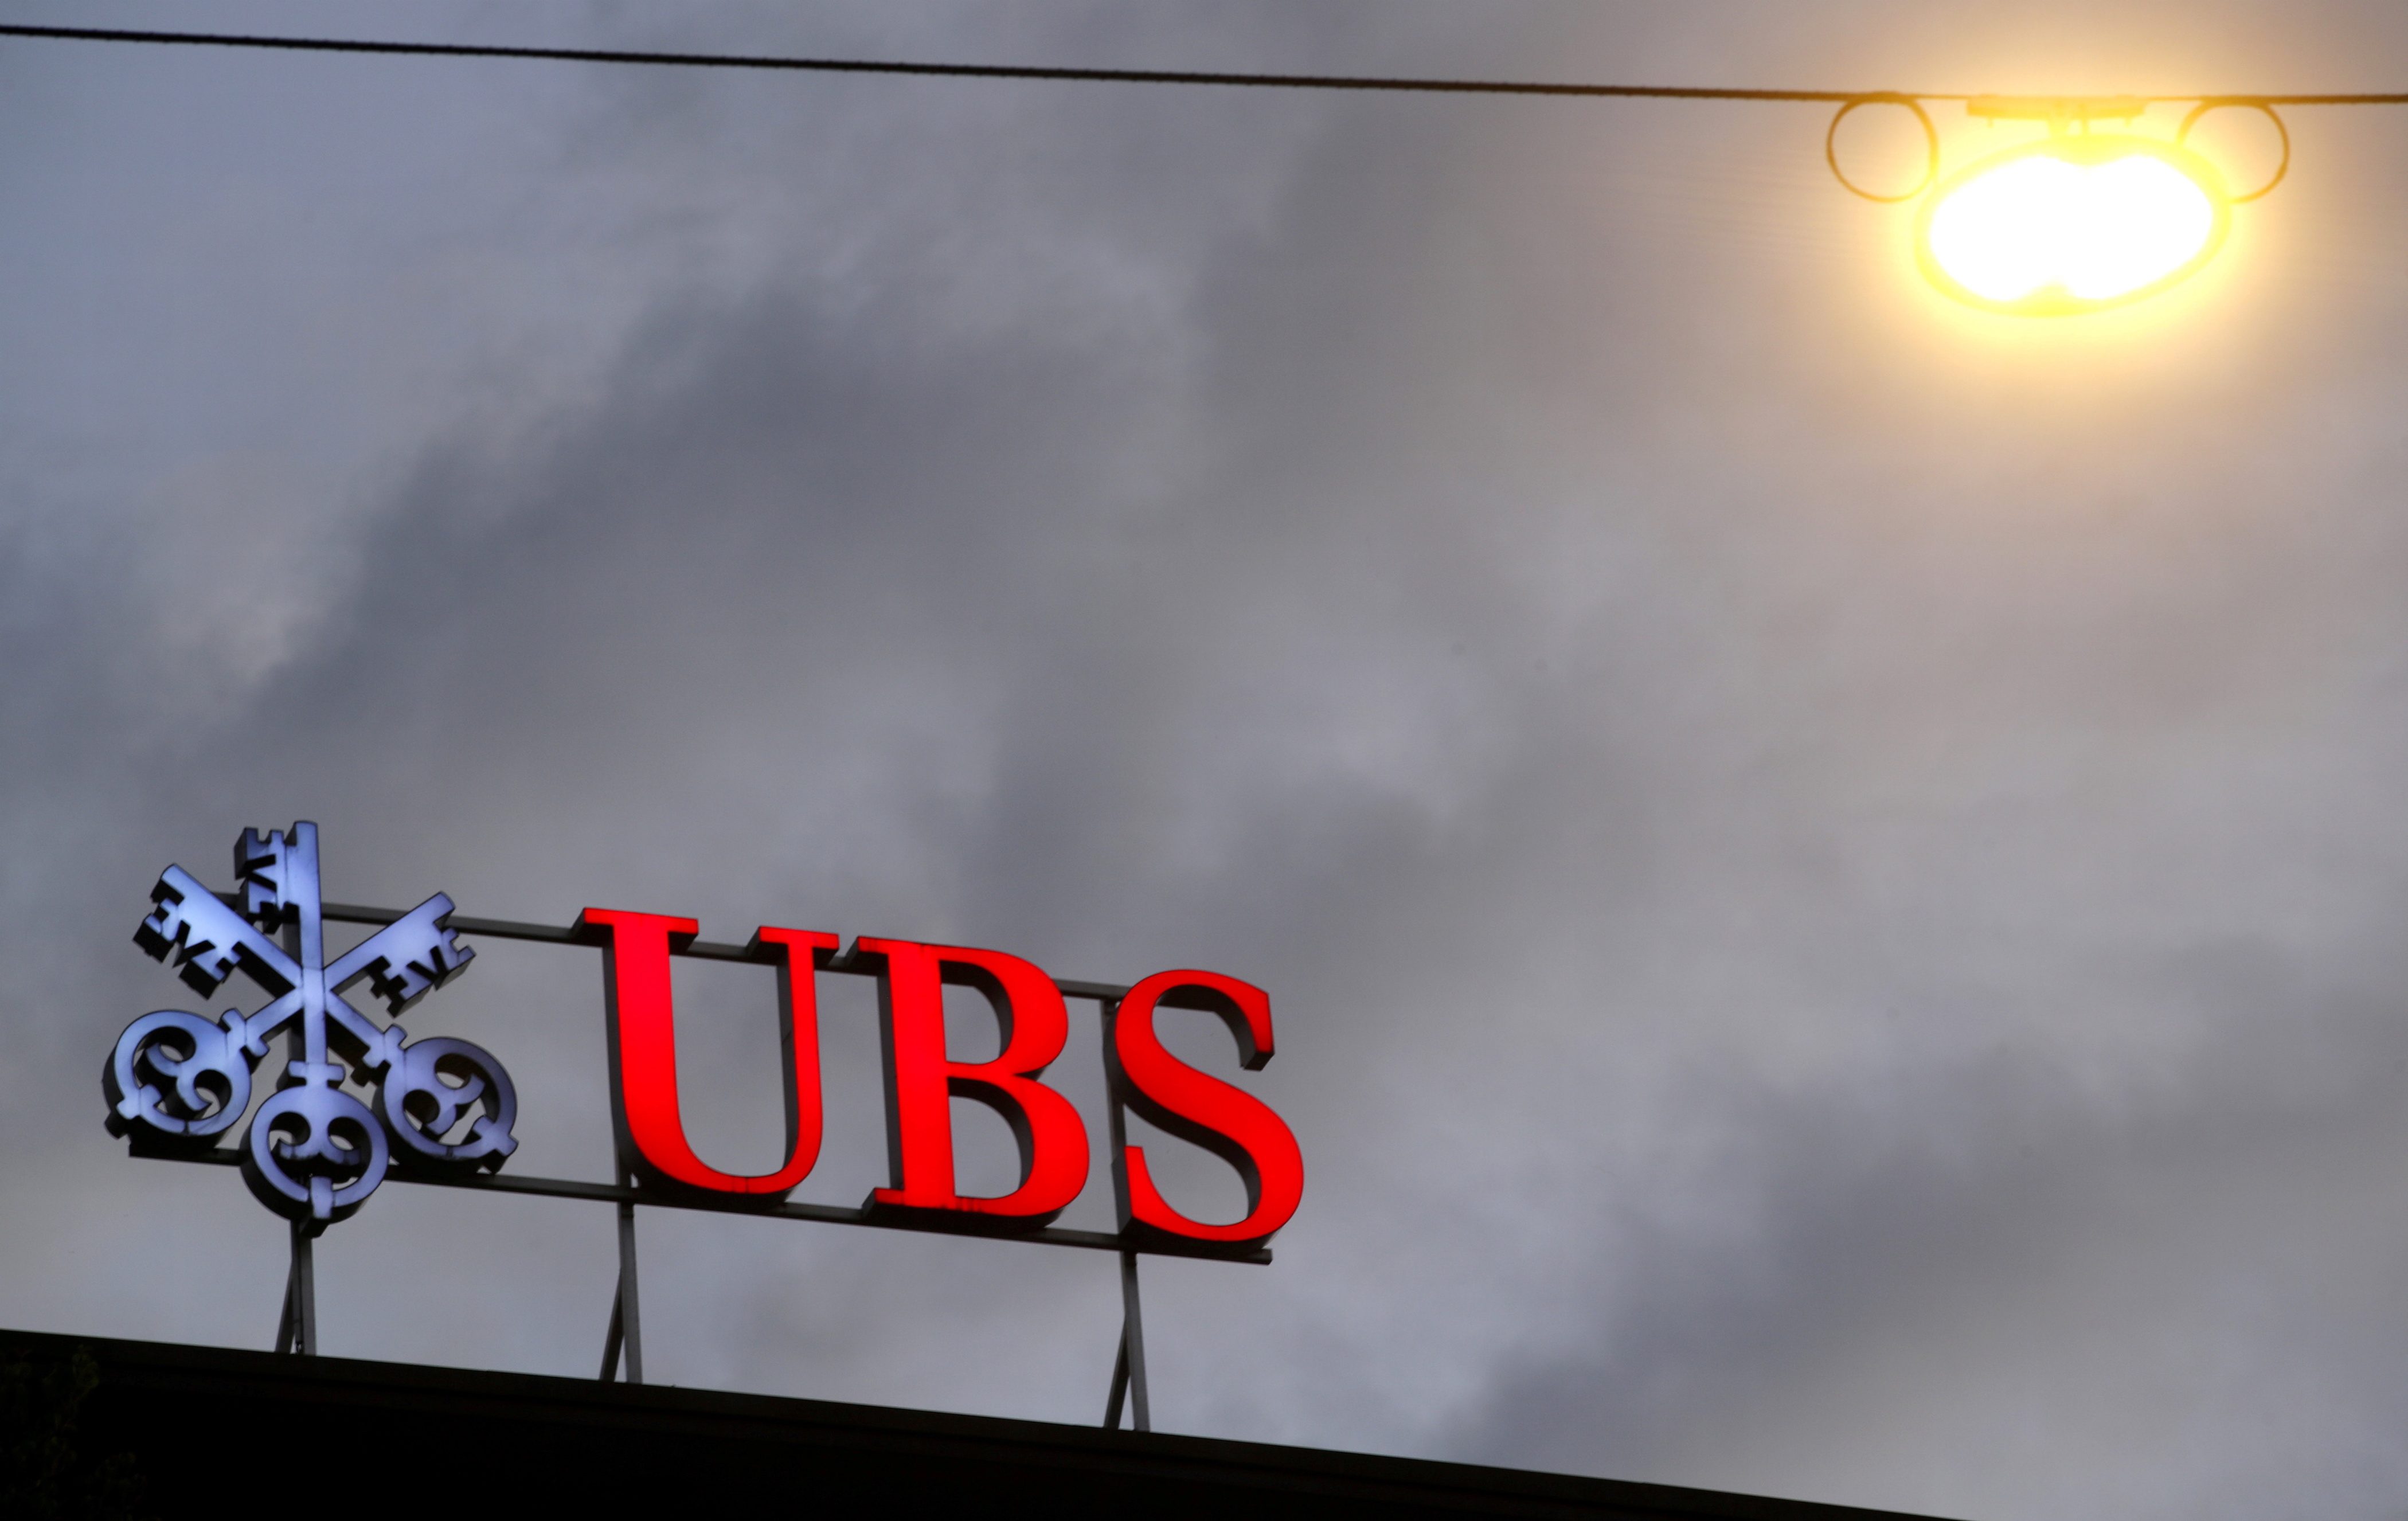 UBS rolls out bonus for young bankers facing pandemic pressures